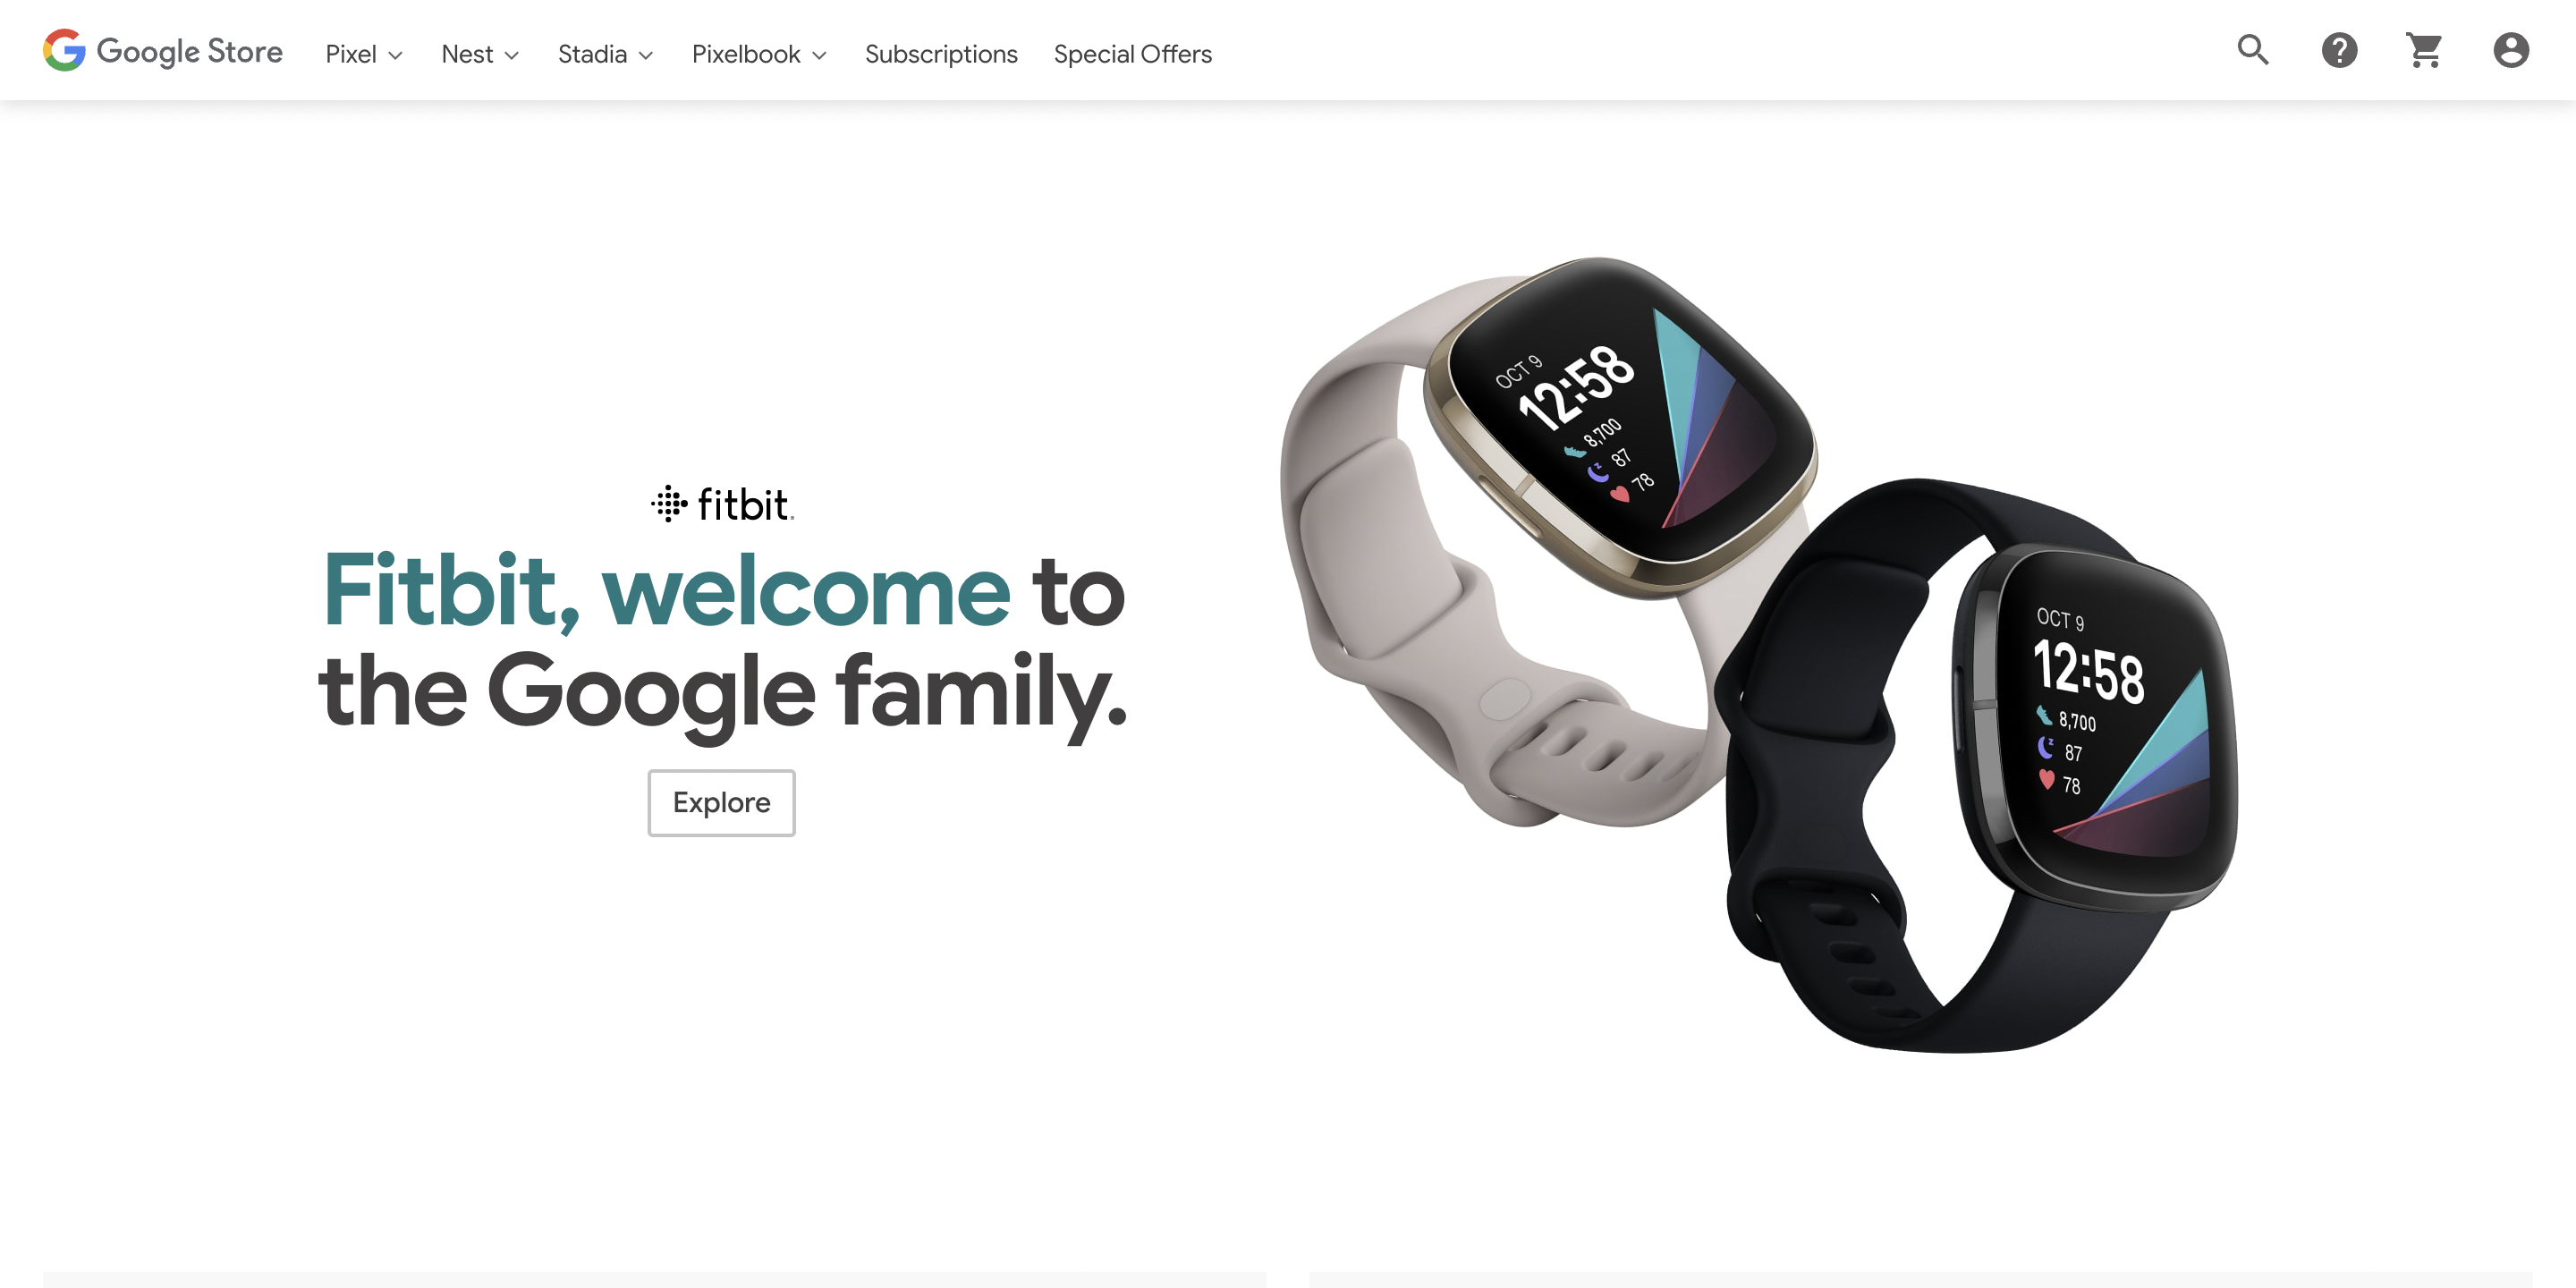 fitbit acquired by google